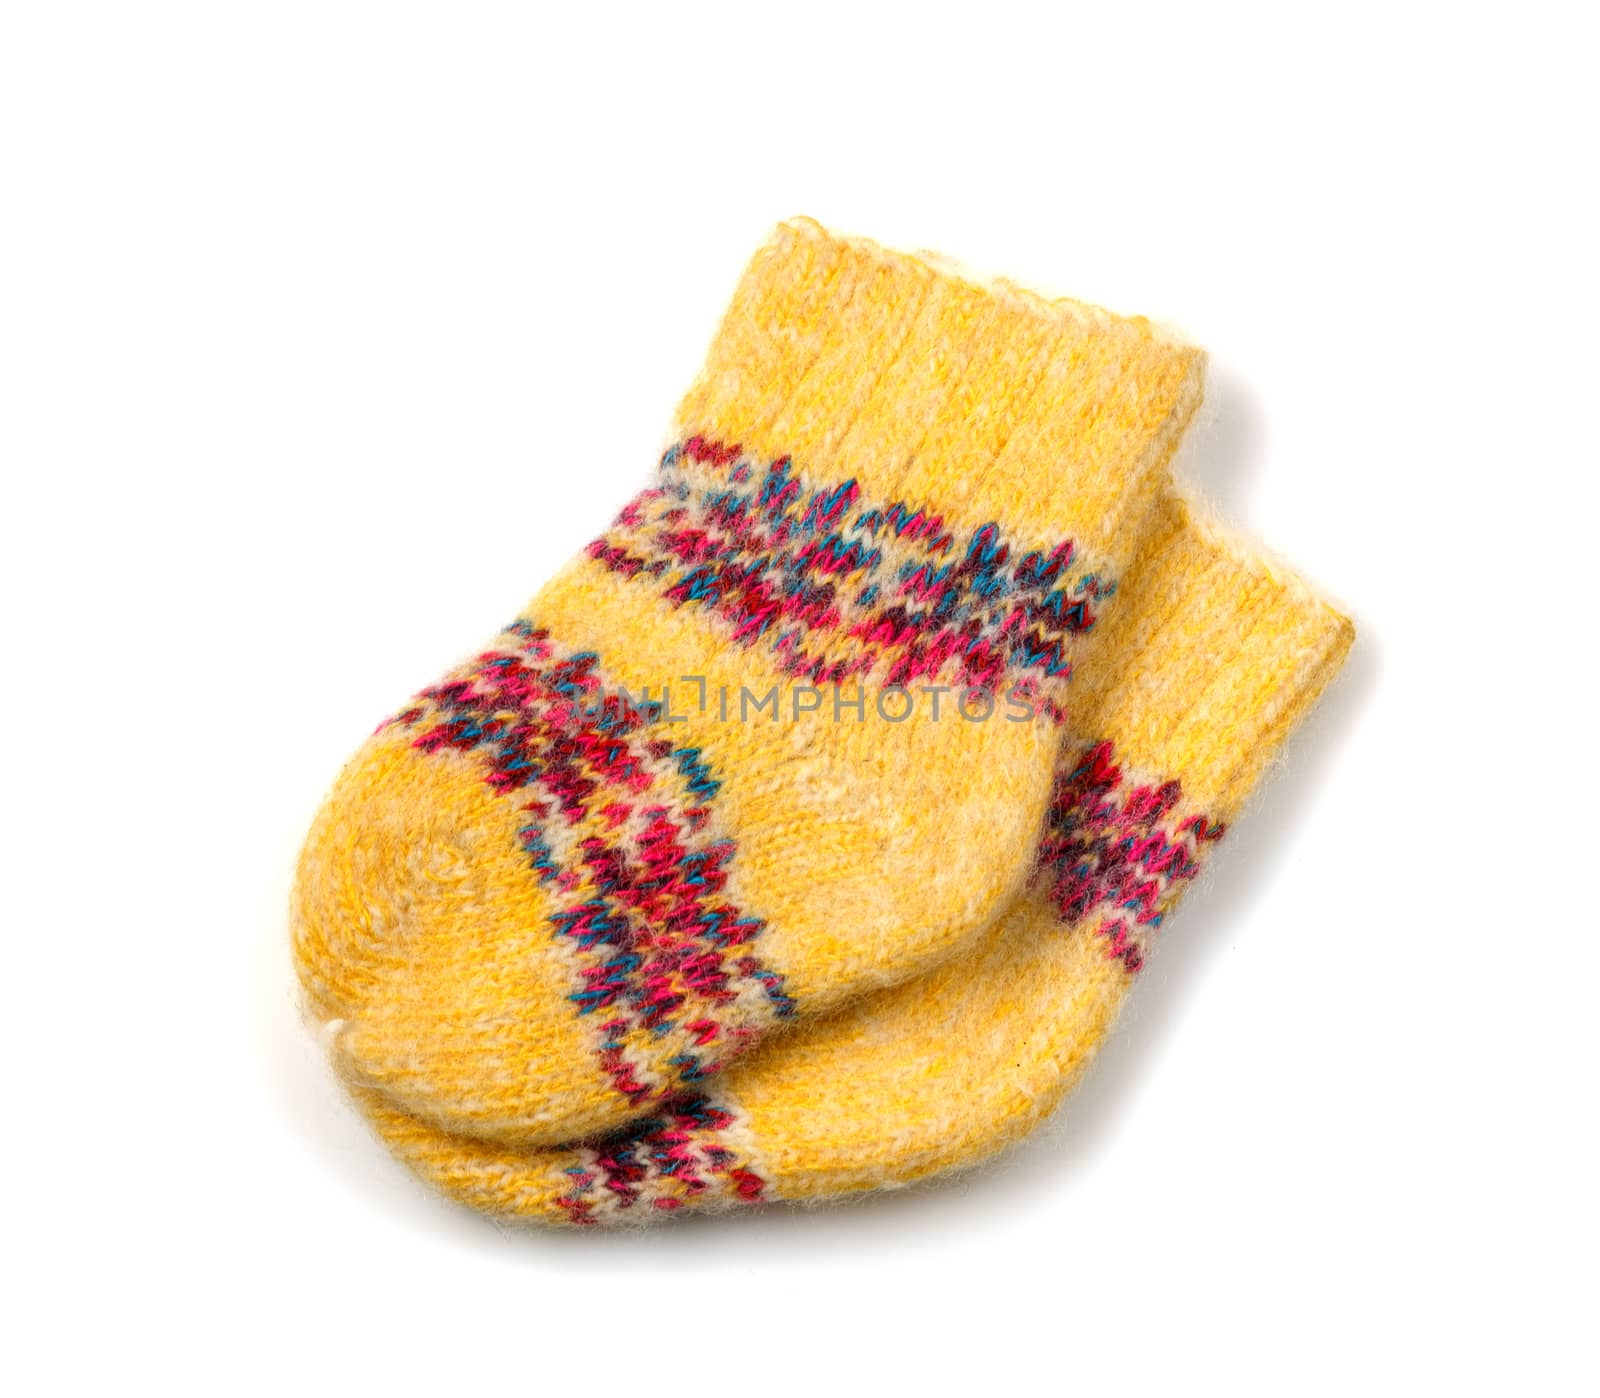 knitted woolen socks on a white background